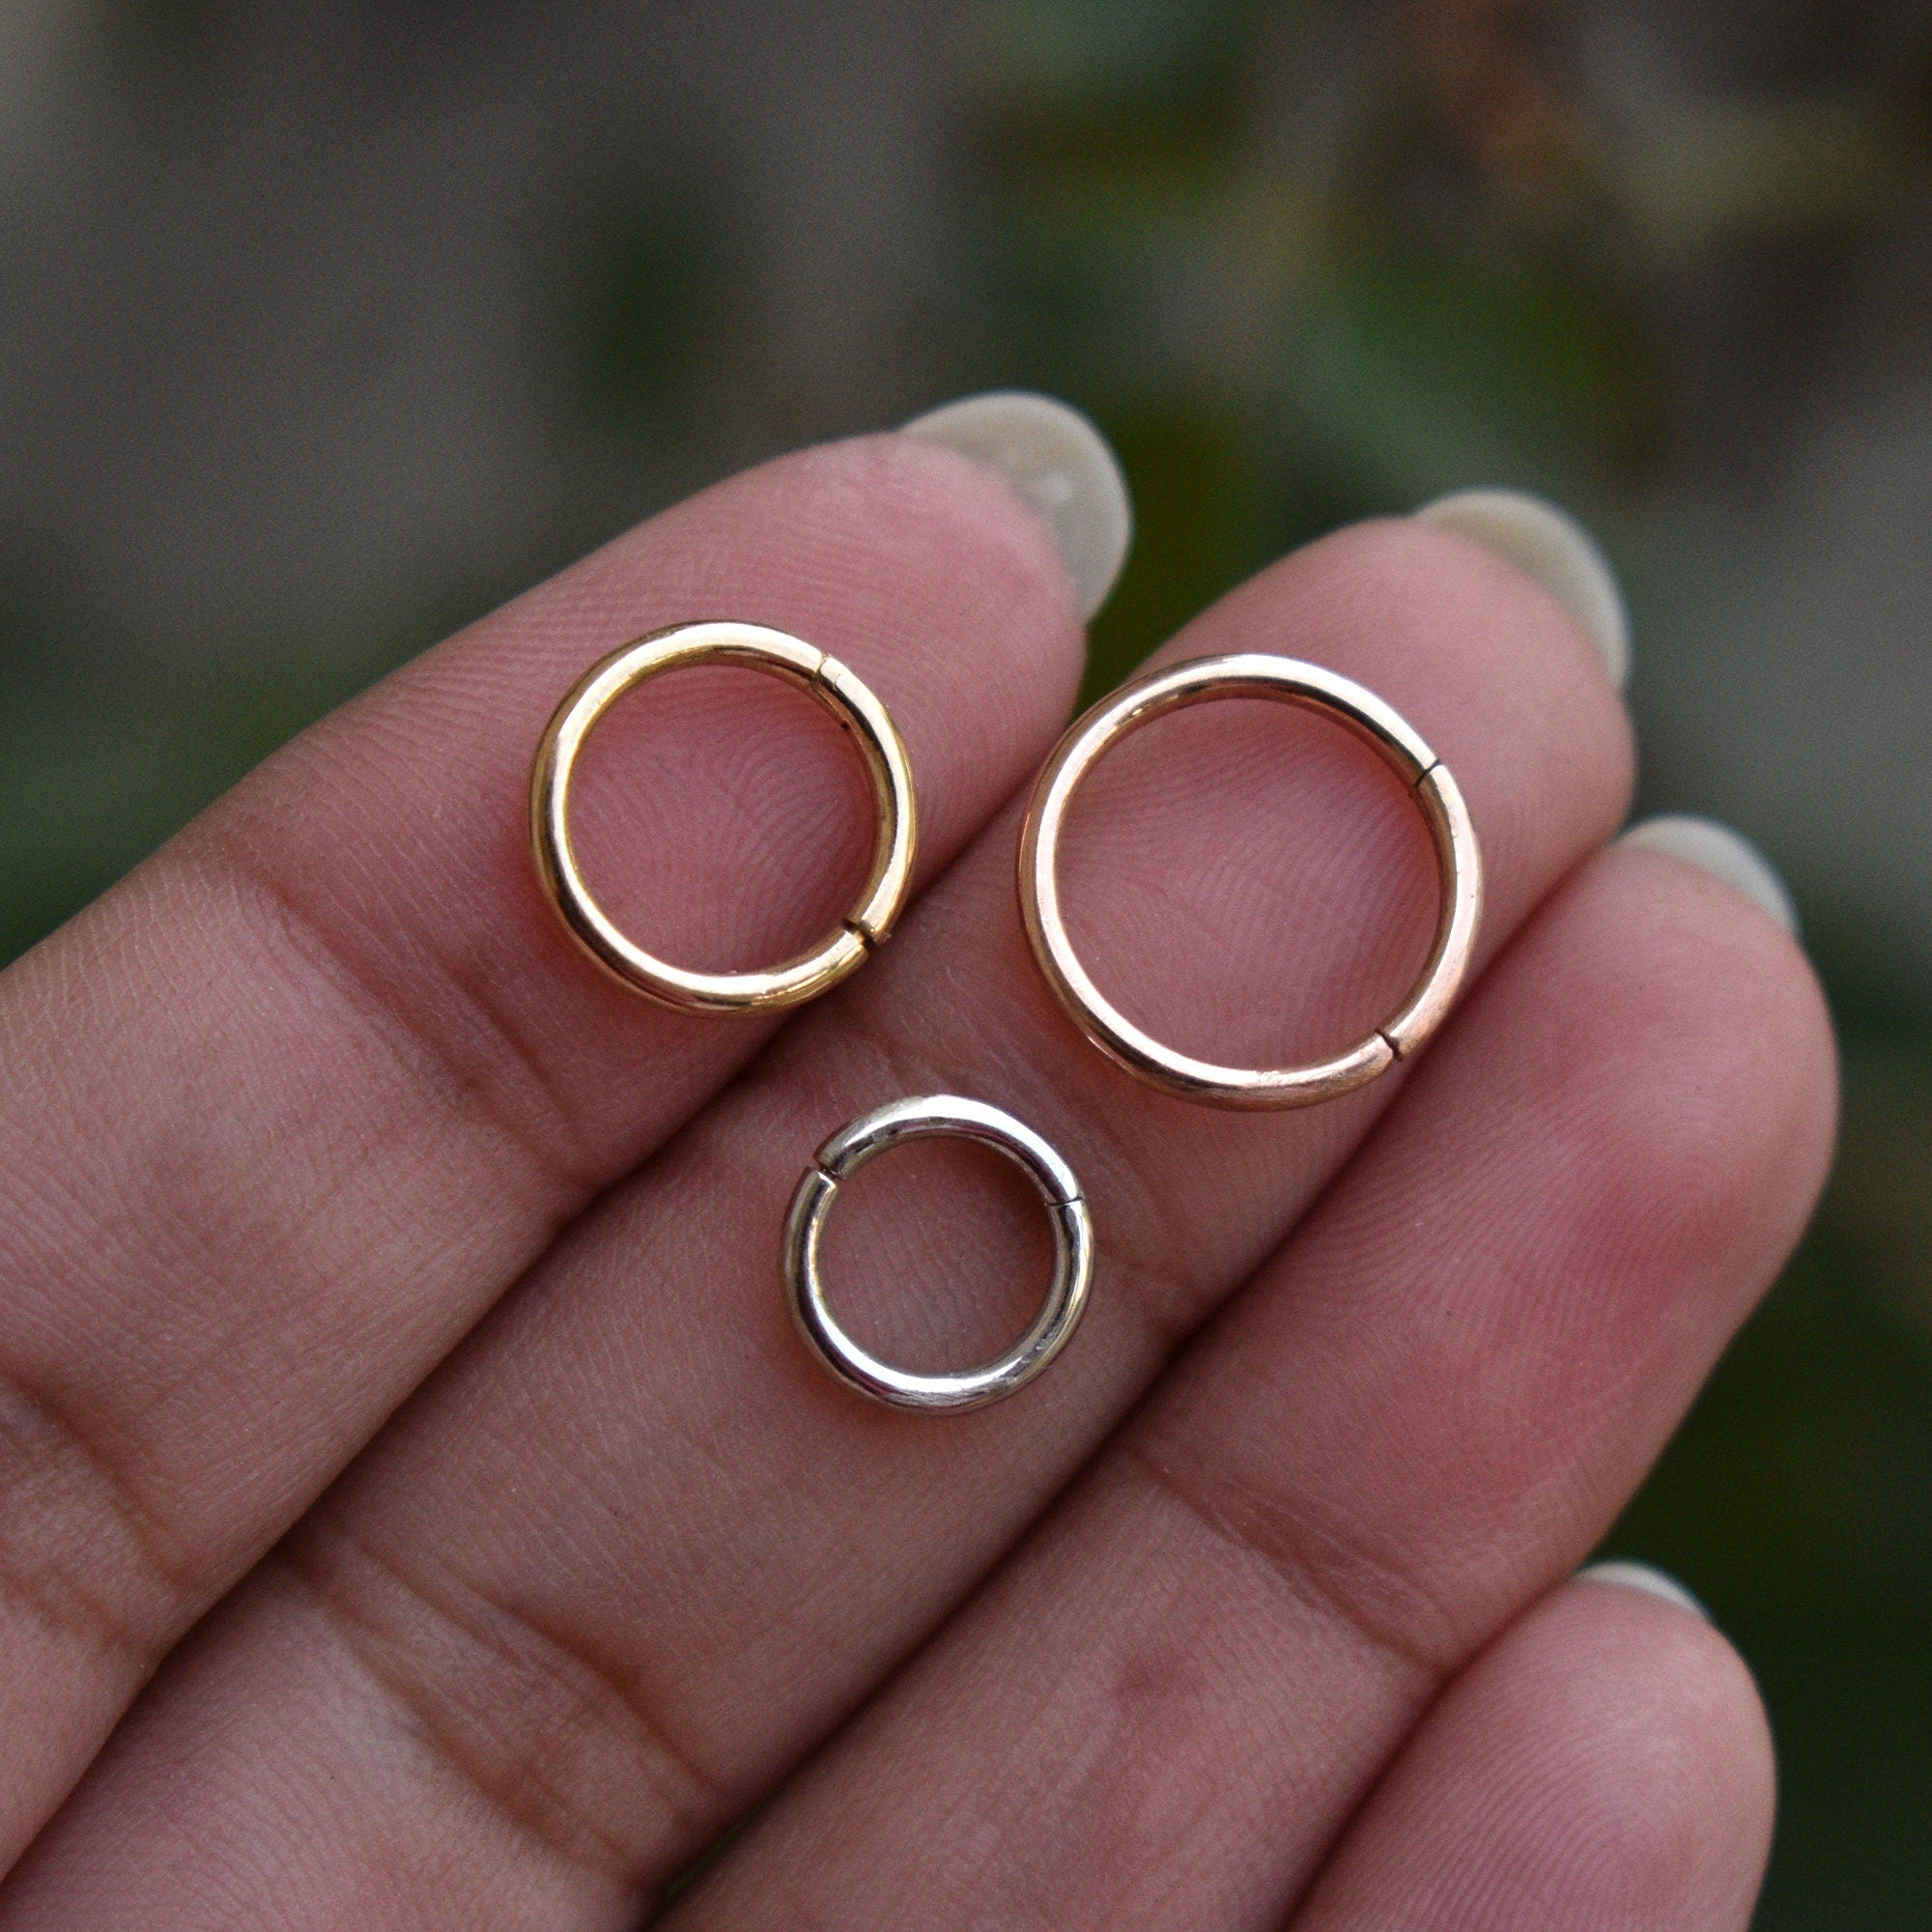 14k 18k REAL Solid Gold Seamless 18g Clicker, 6mm 8mm 10mm Infinity Gold Hoop Nose Daith Helix Tragus Conch Rook, Body Piercing Jewelry